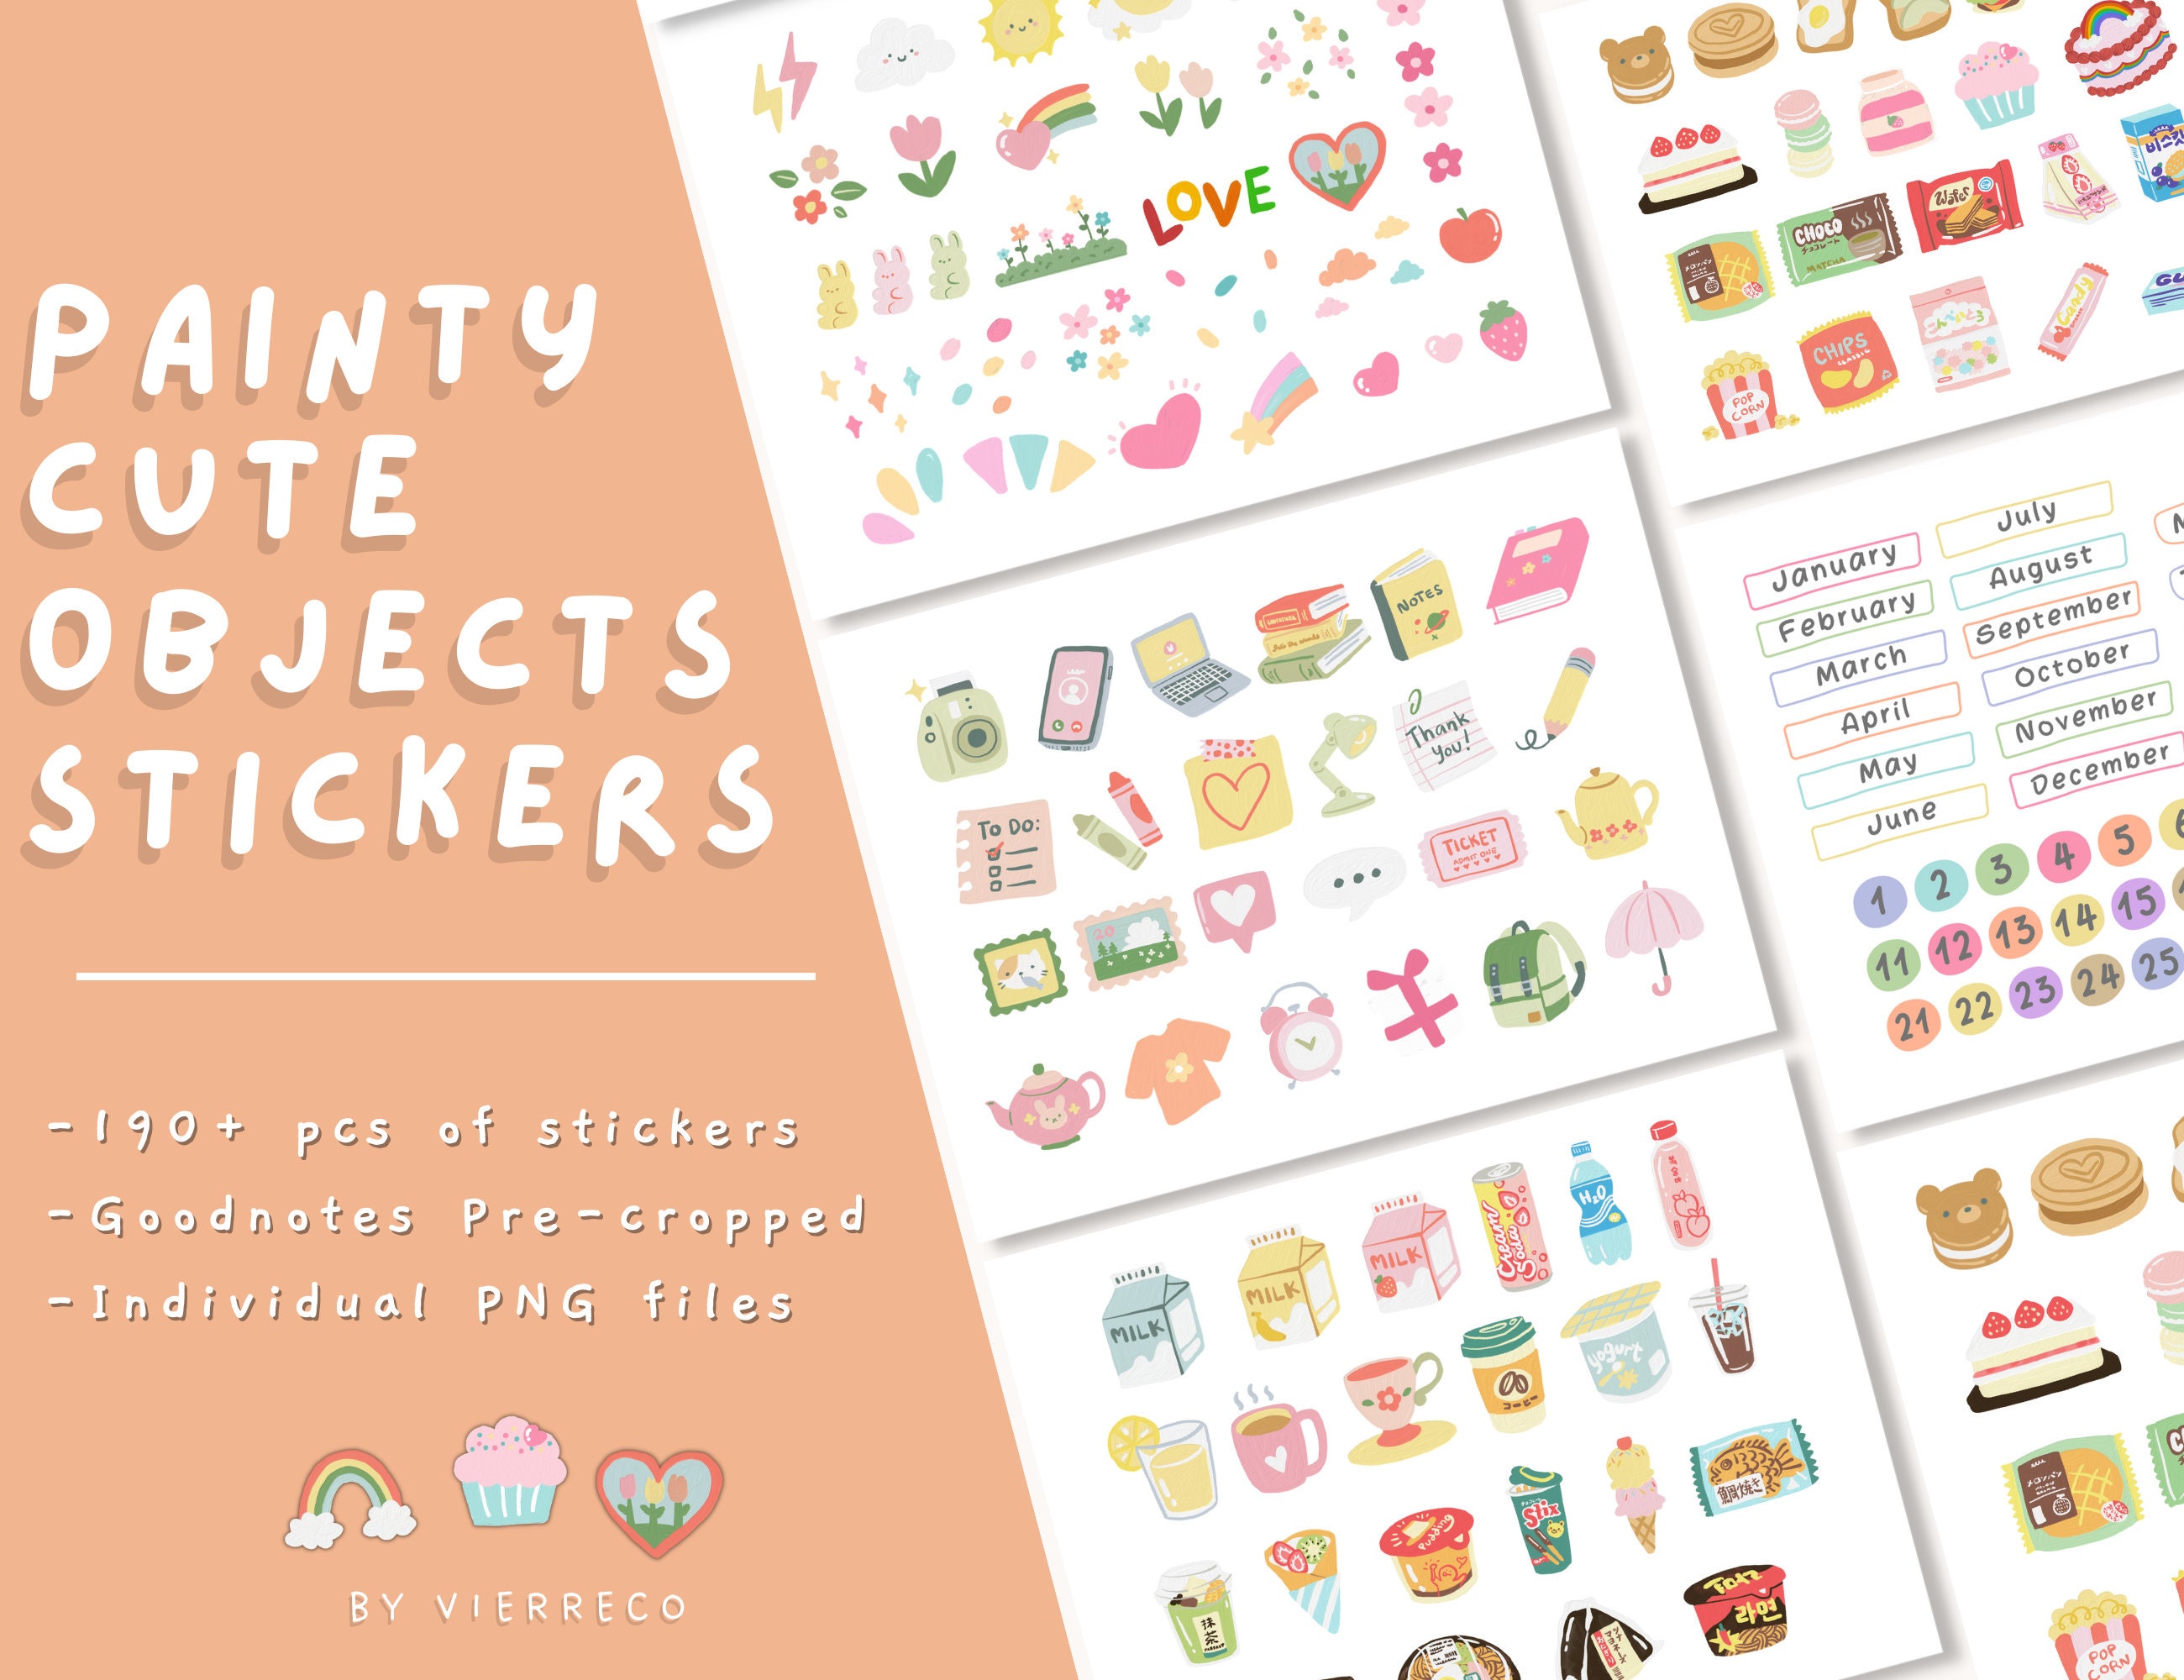 The Cute Sticker Pack (Digital Stickers, Good Notes Stickers) By Lollipop  Hand Drawn